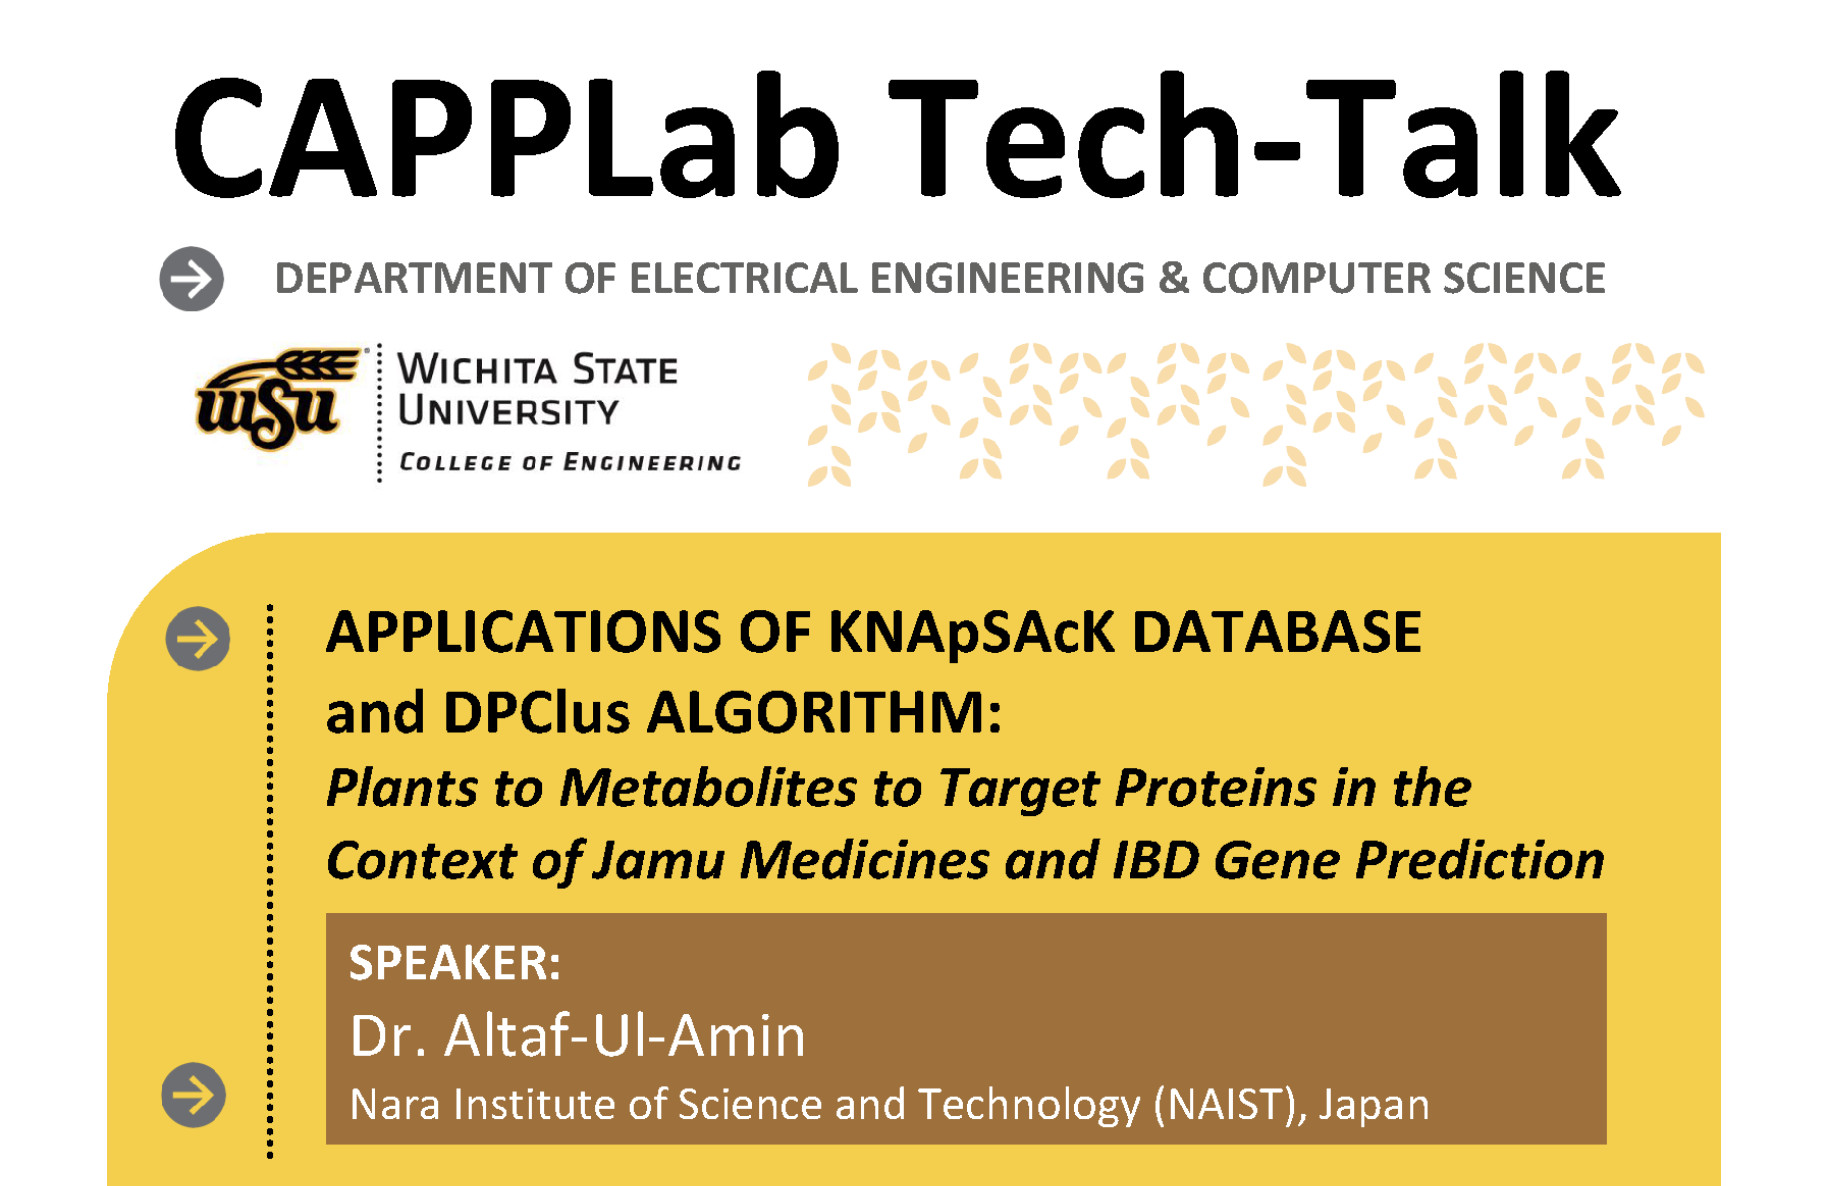 You're invited to a CAPPLab Tech-Talk from the department of Electrical Engineering & Computer Science.